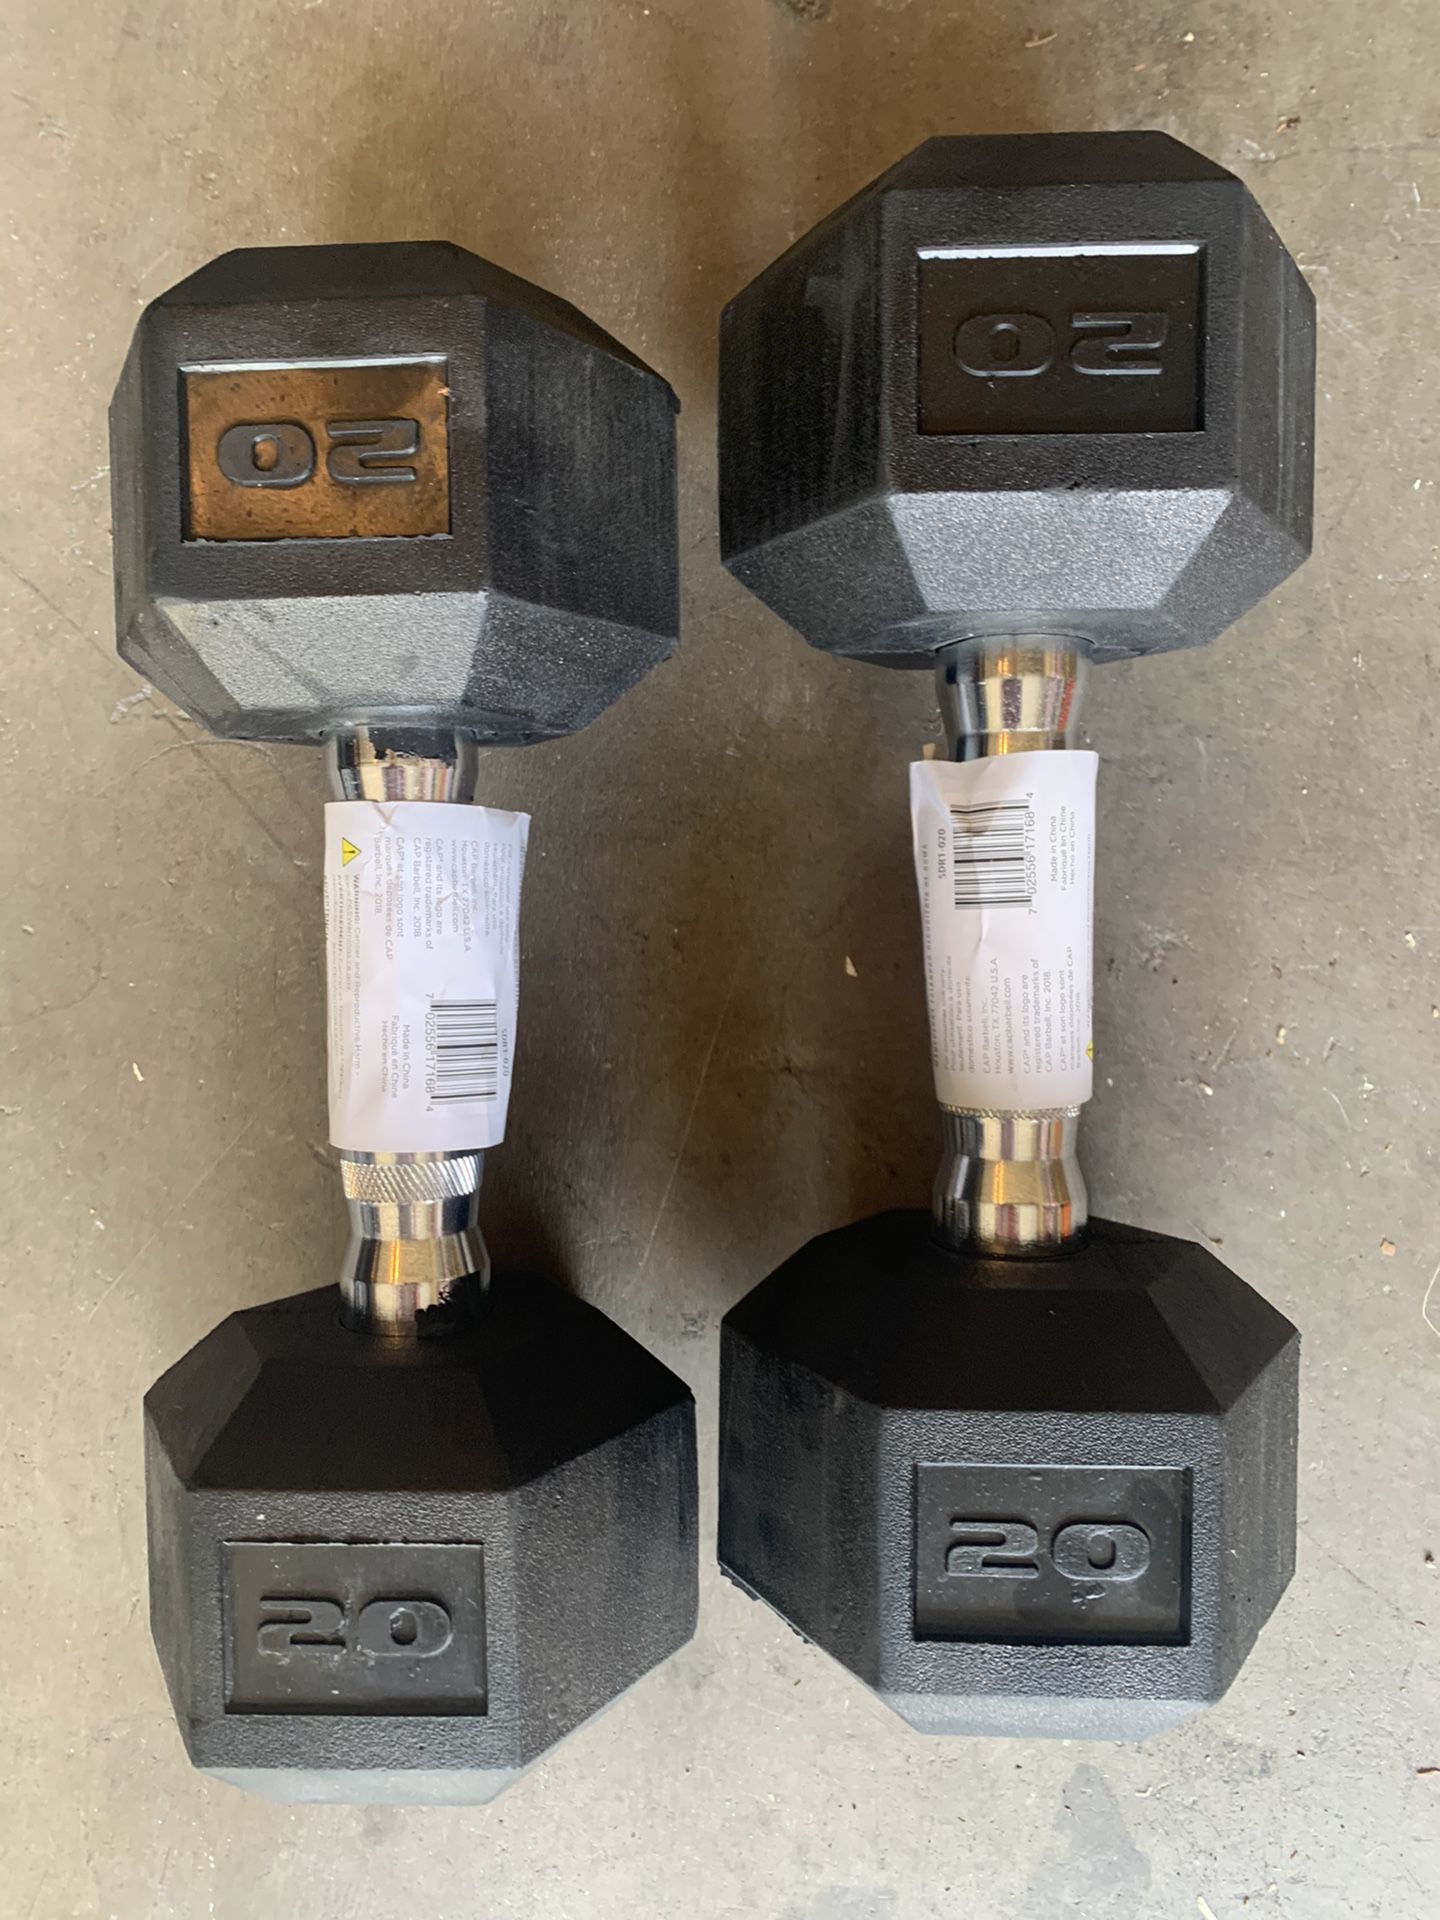 20 pound weights $90 BRAND NEW dumbbells